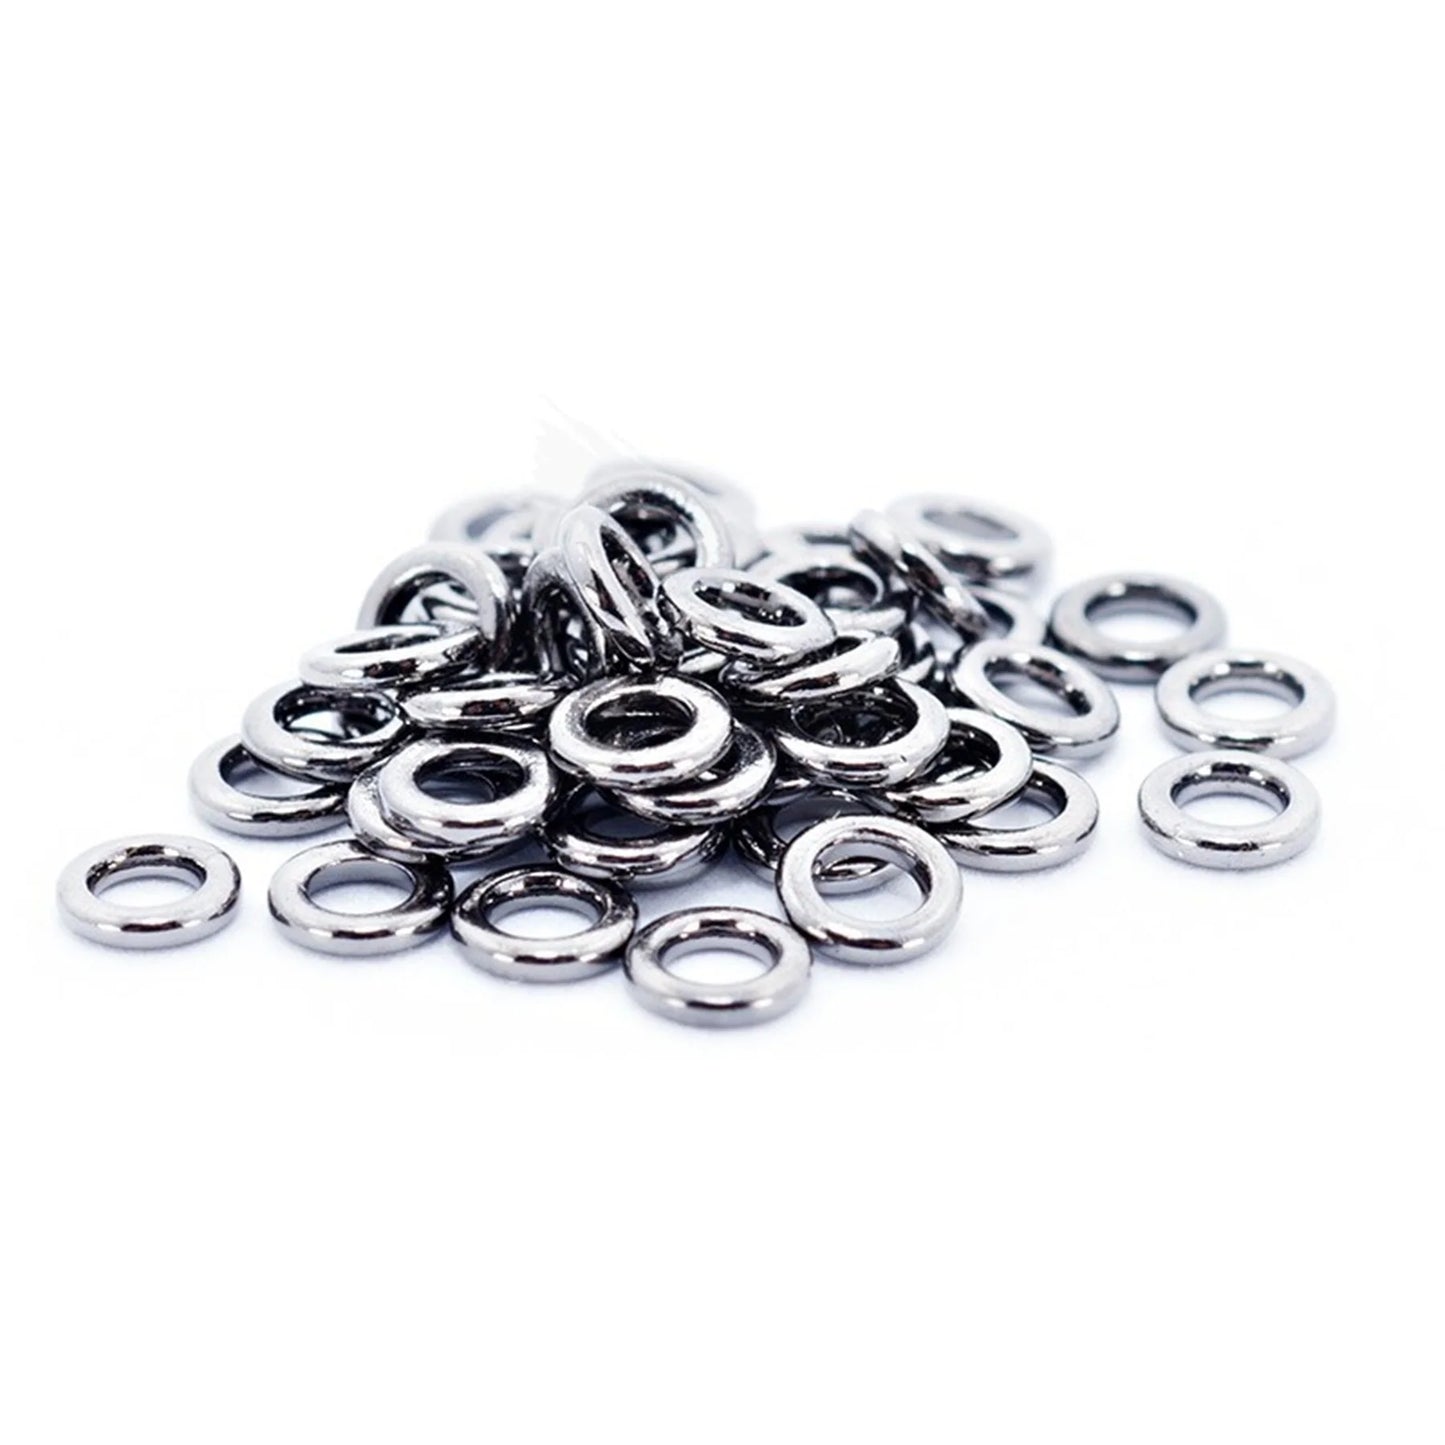 AIRFLO FLY FISHING MICRO TIPPET RINGS - 2mm